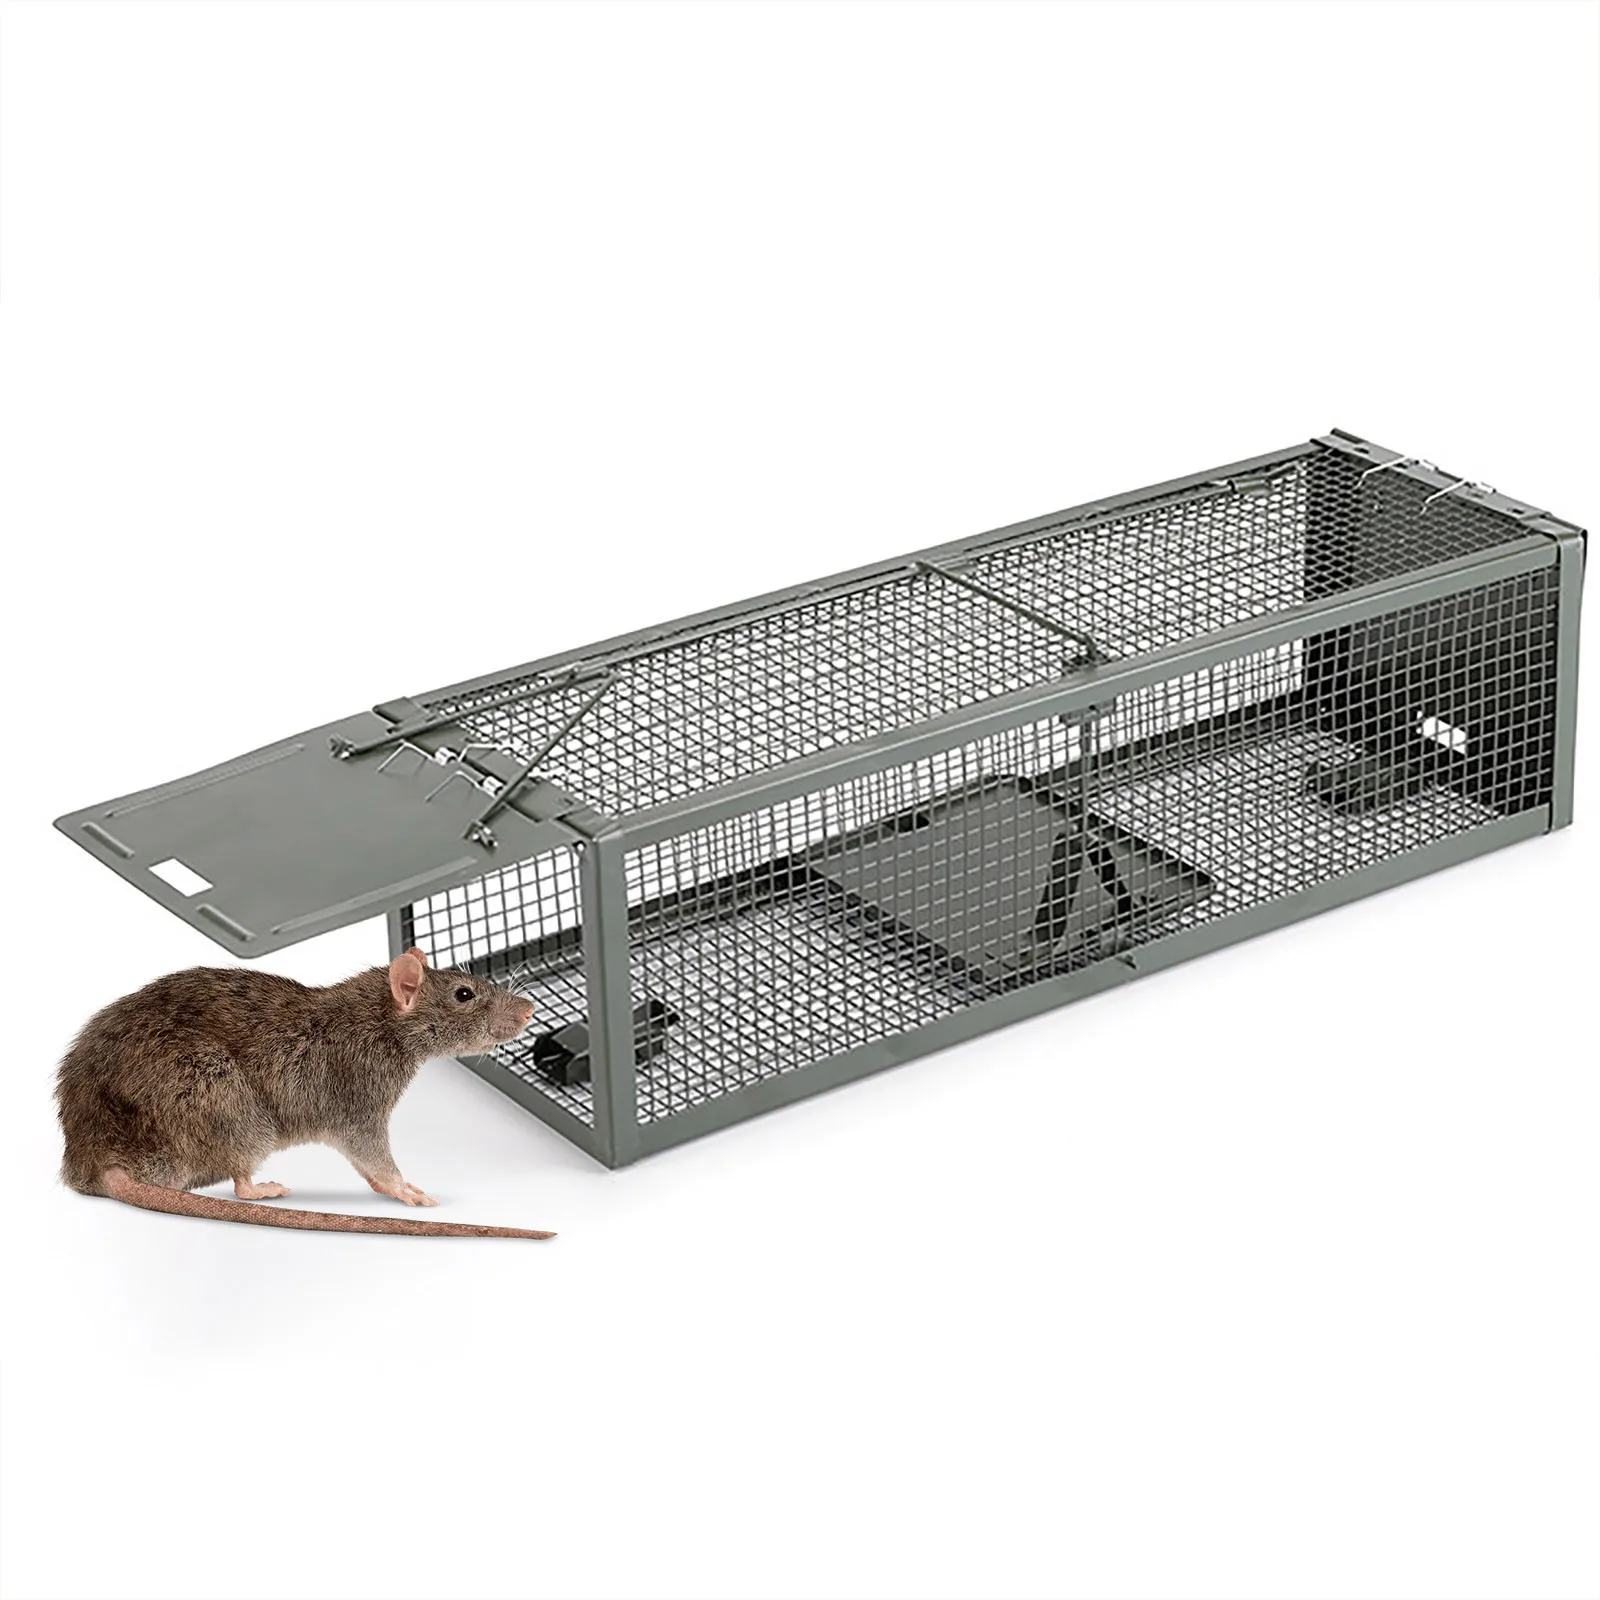 Mouse Mice Rat Rodent Animal Control Catch Bait Humane Live Trap Hamster Cage 